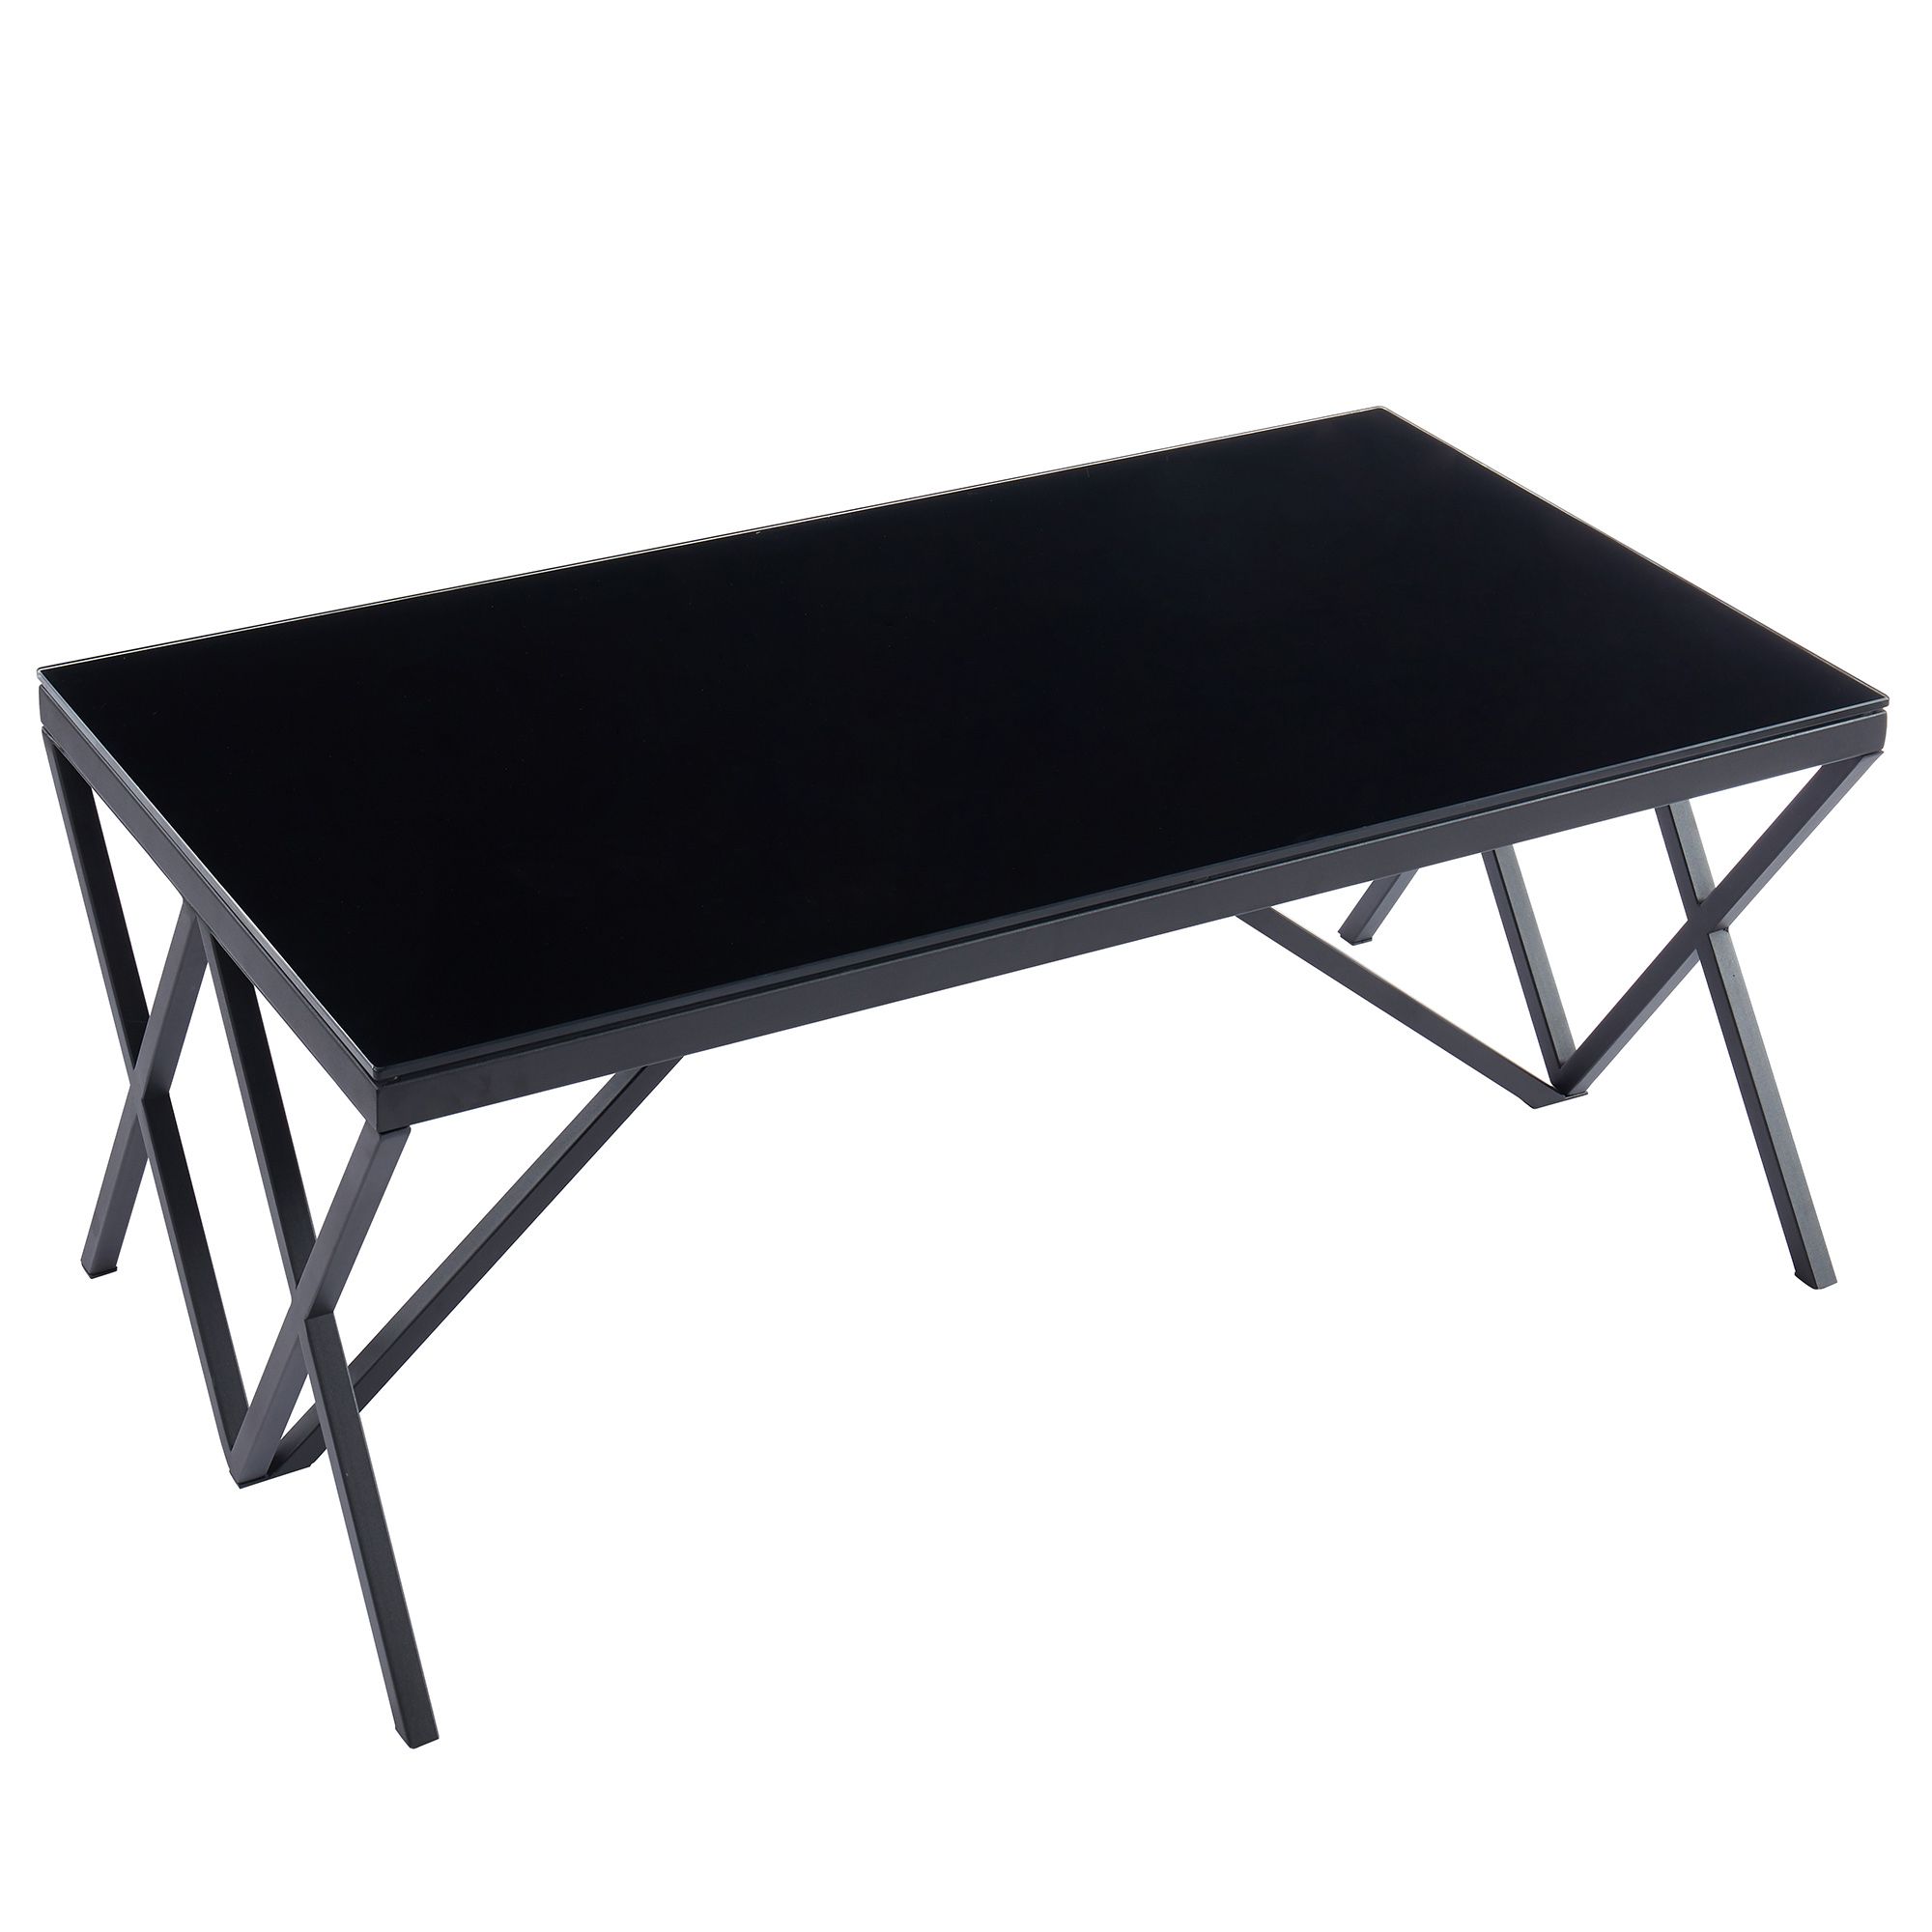 Calix Coffee Table In Black – Aux Merveilles Pertaining To Addison&amp;lane Calix Square Tables (Gallery 19 of 20)